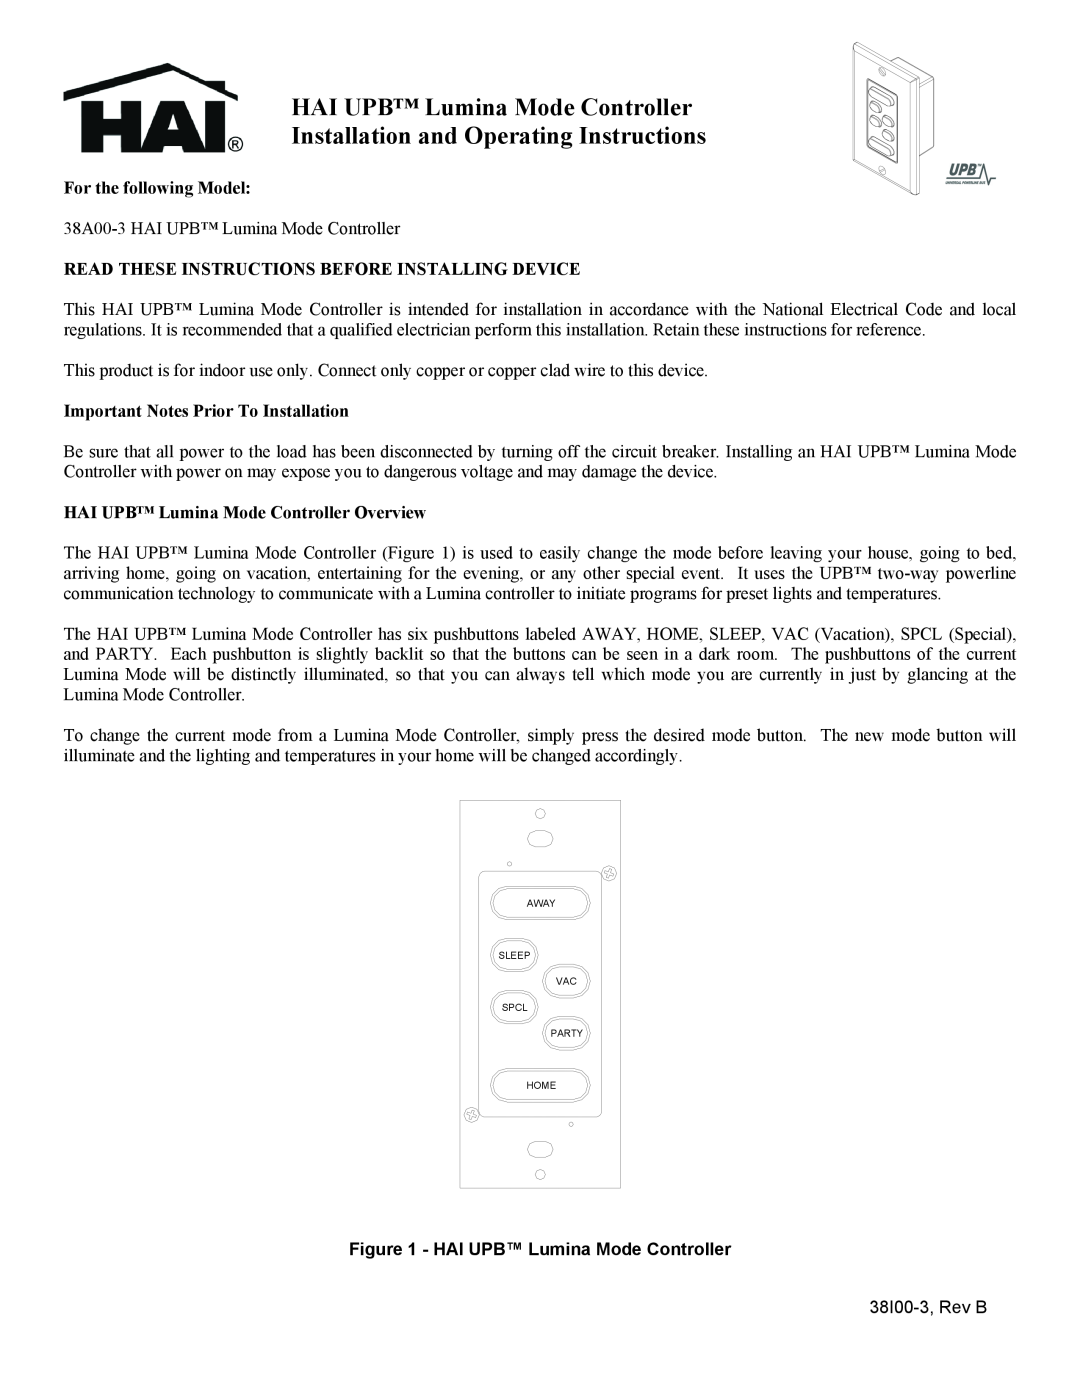 Home Automation 38A00-3 operating instructions For the following Model, Read These Instructions Before Installing Device 